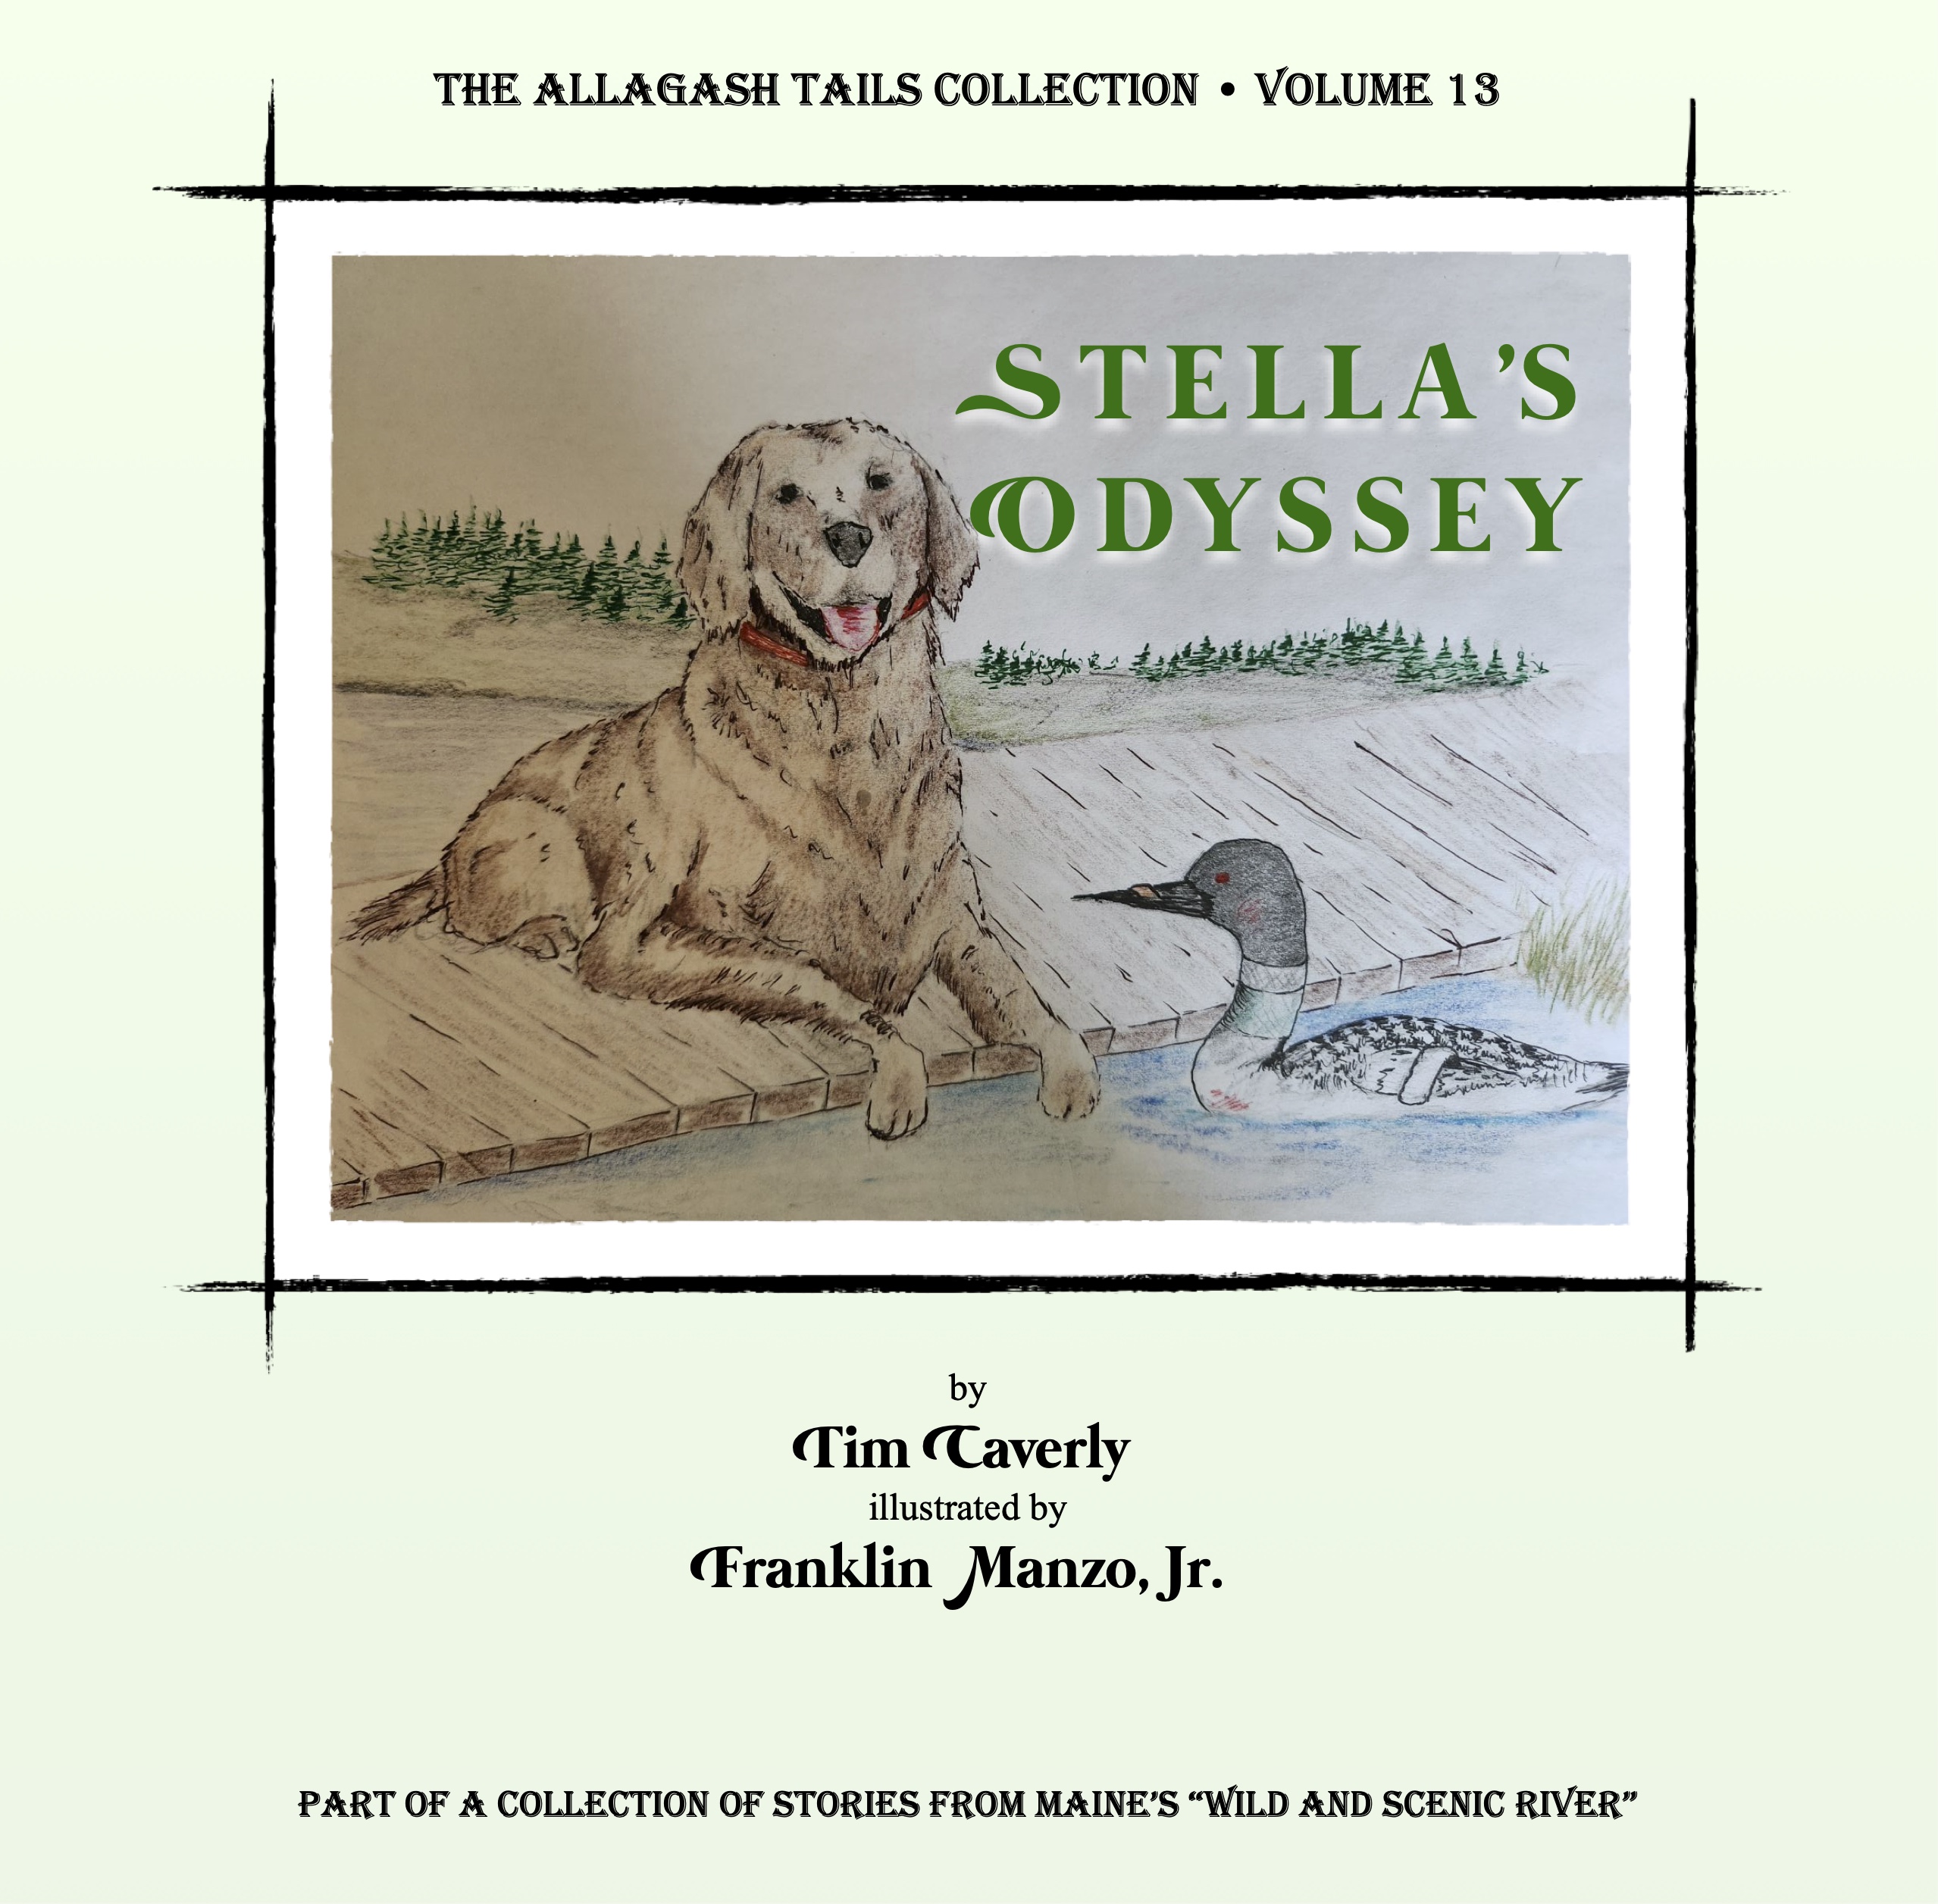 Stella’s Odyssey • The Allagash Tails Collections • Volume 13